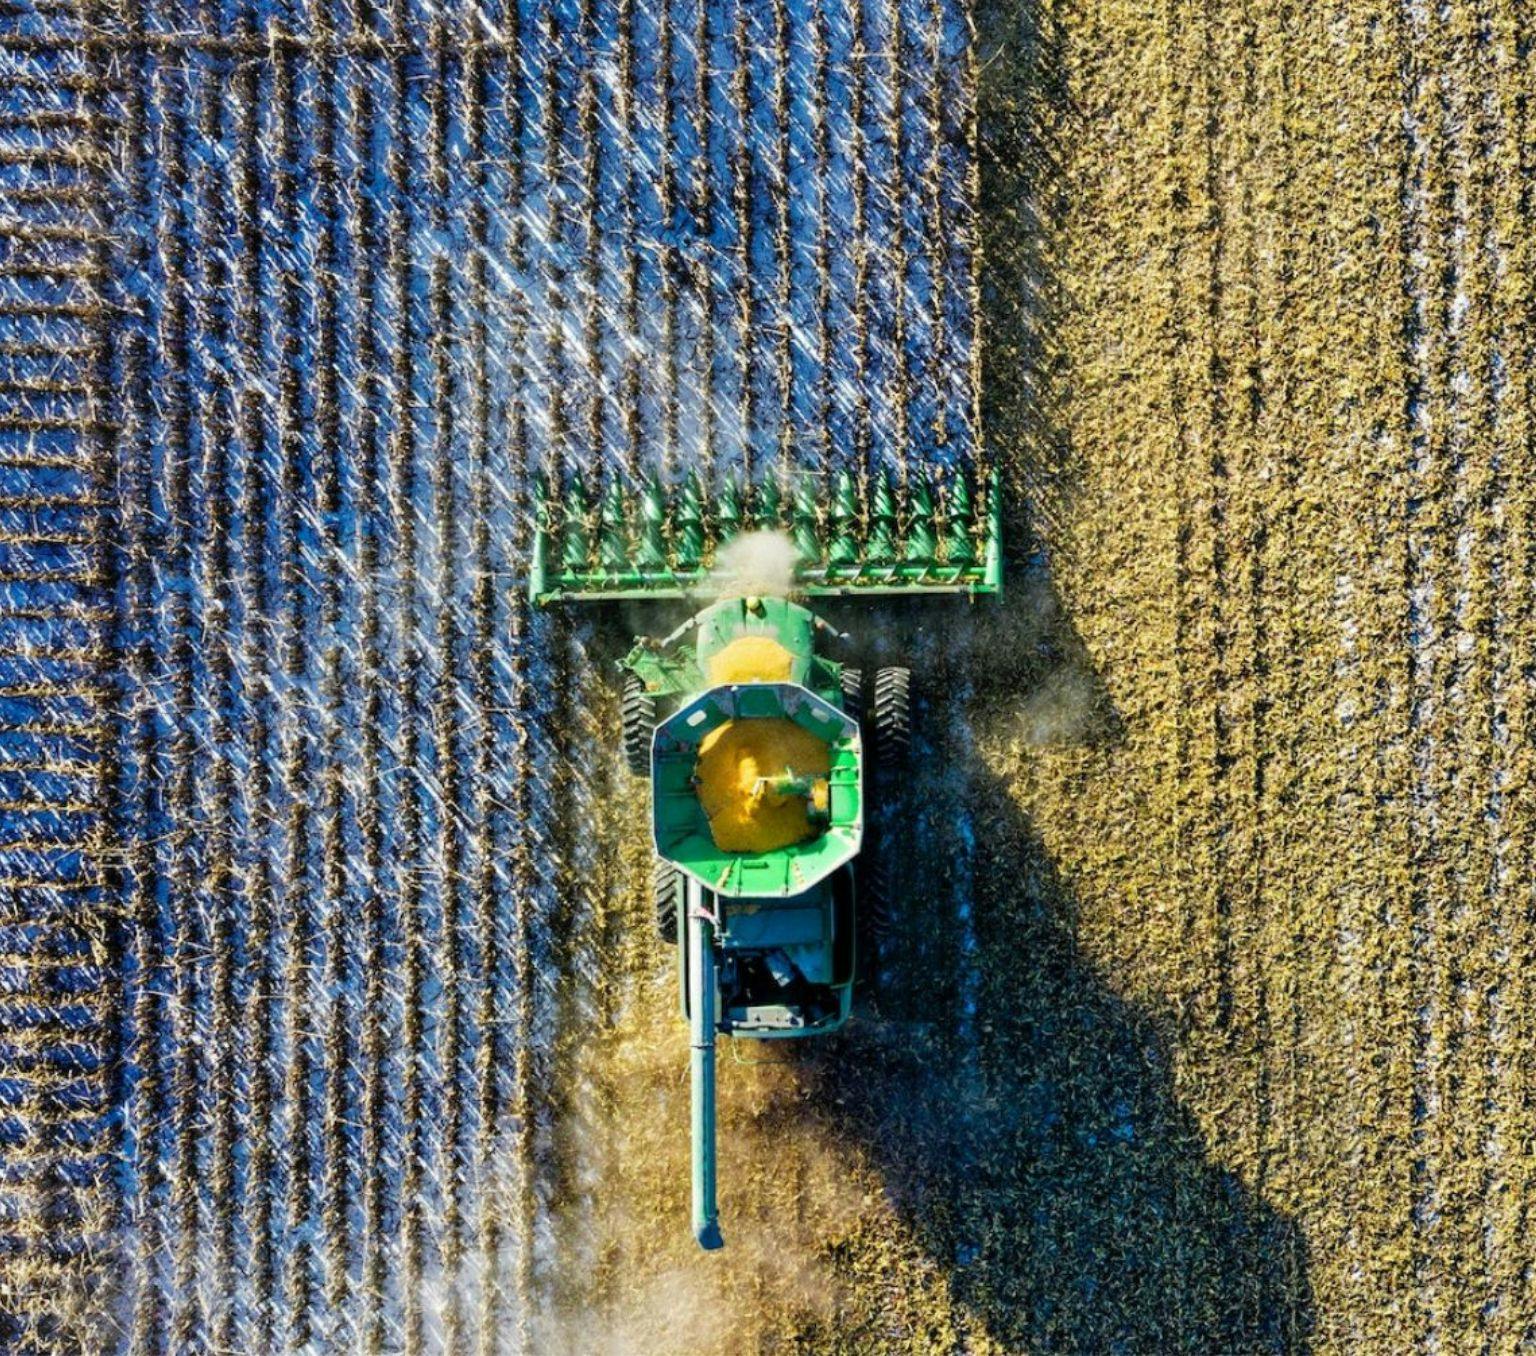 Aerial view of a green tractor milling through a paddock.